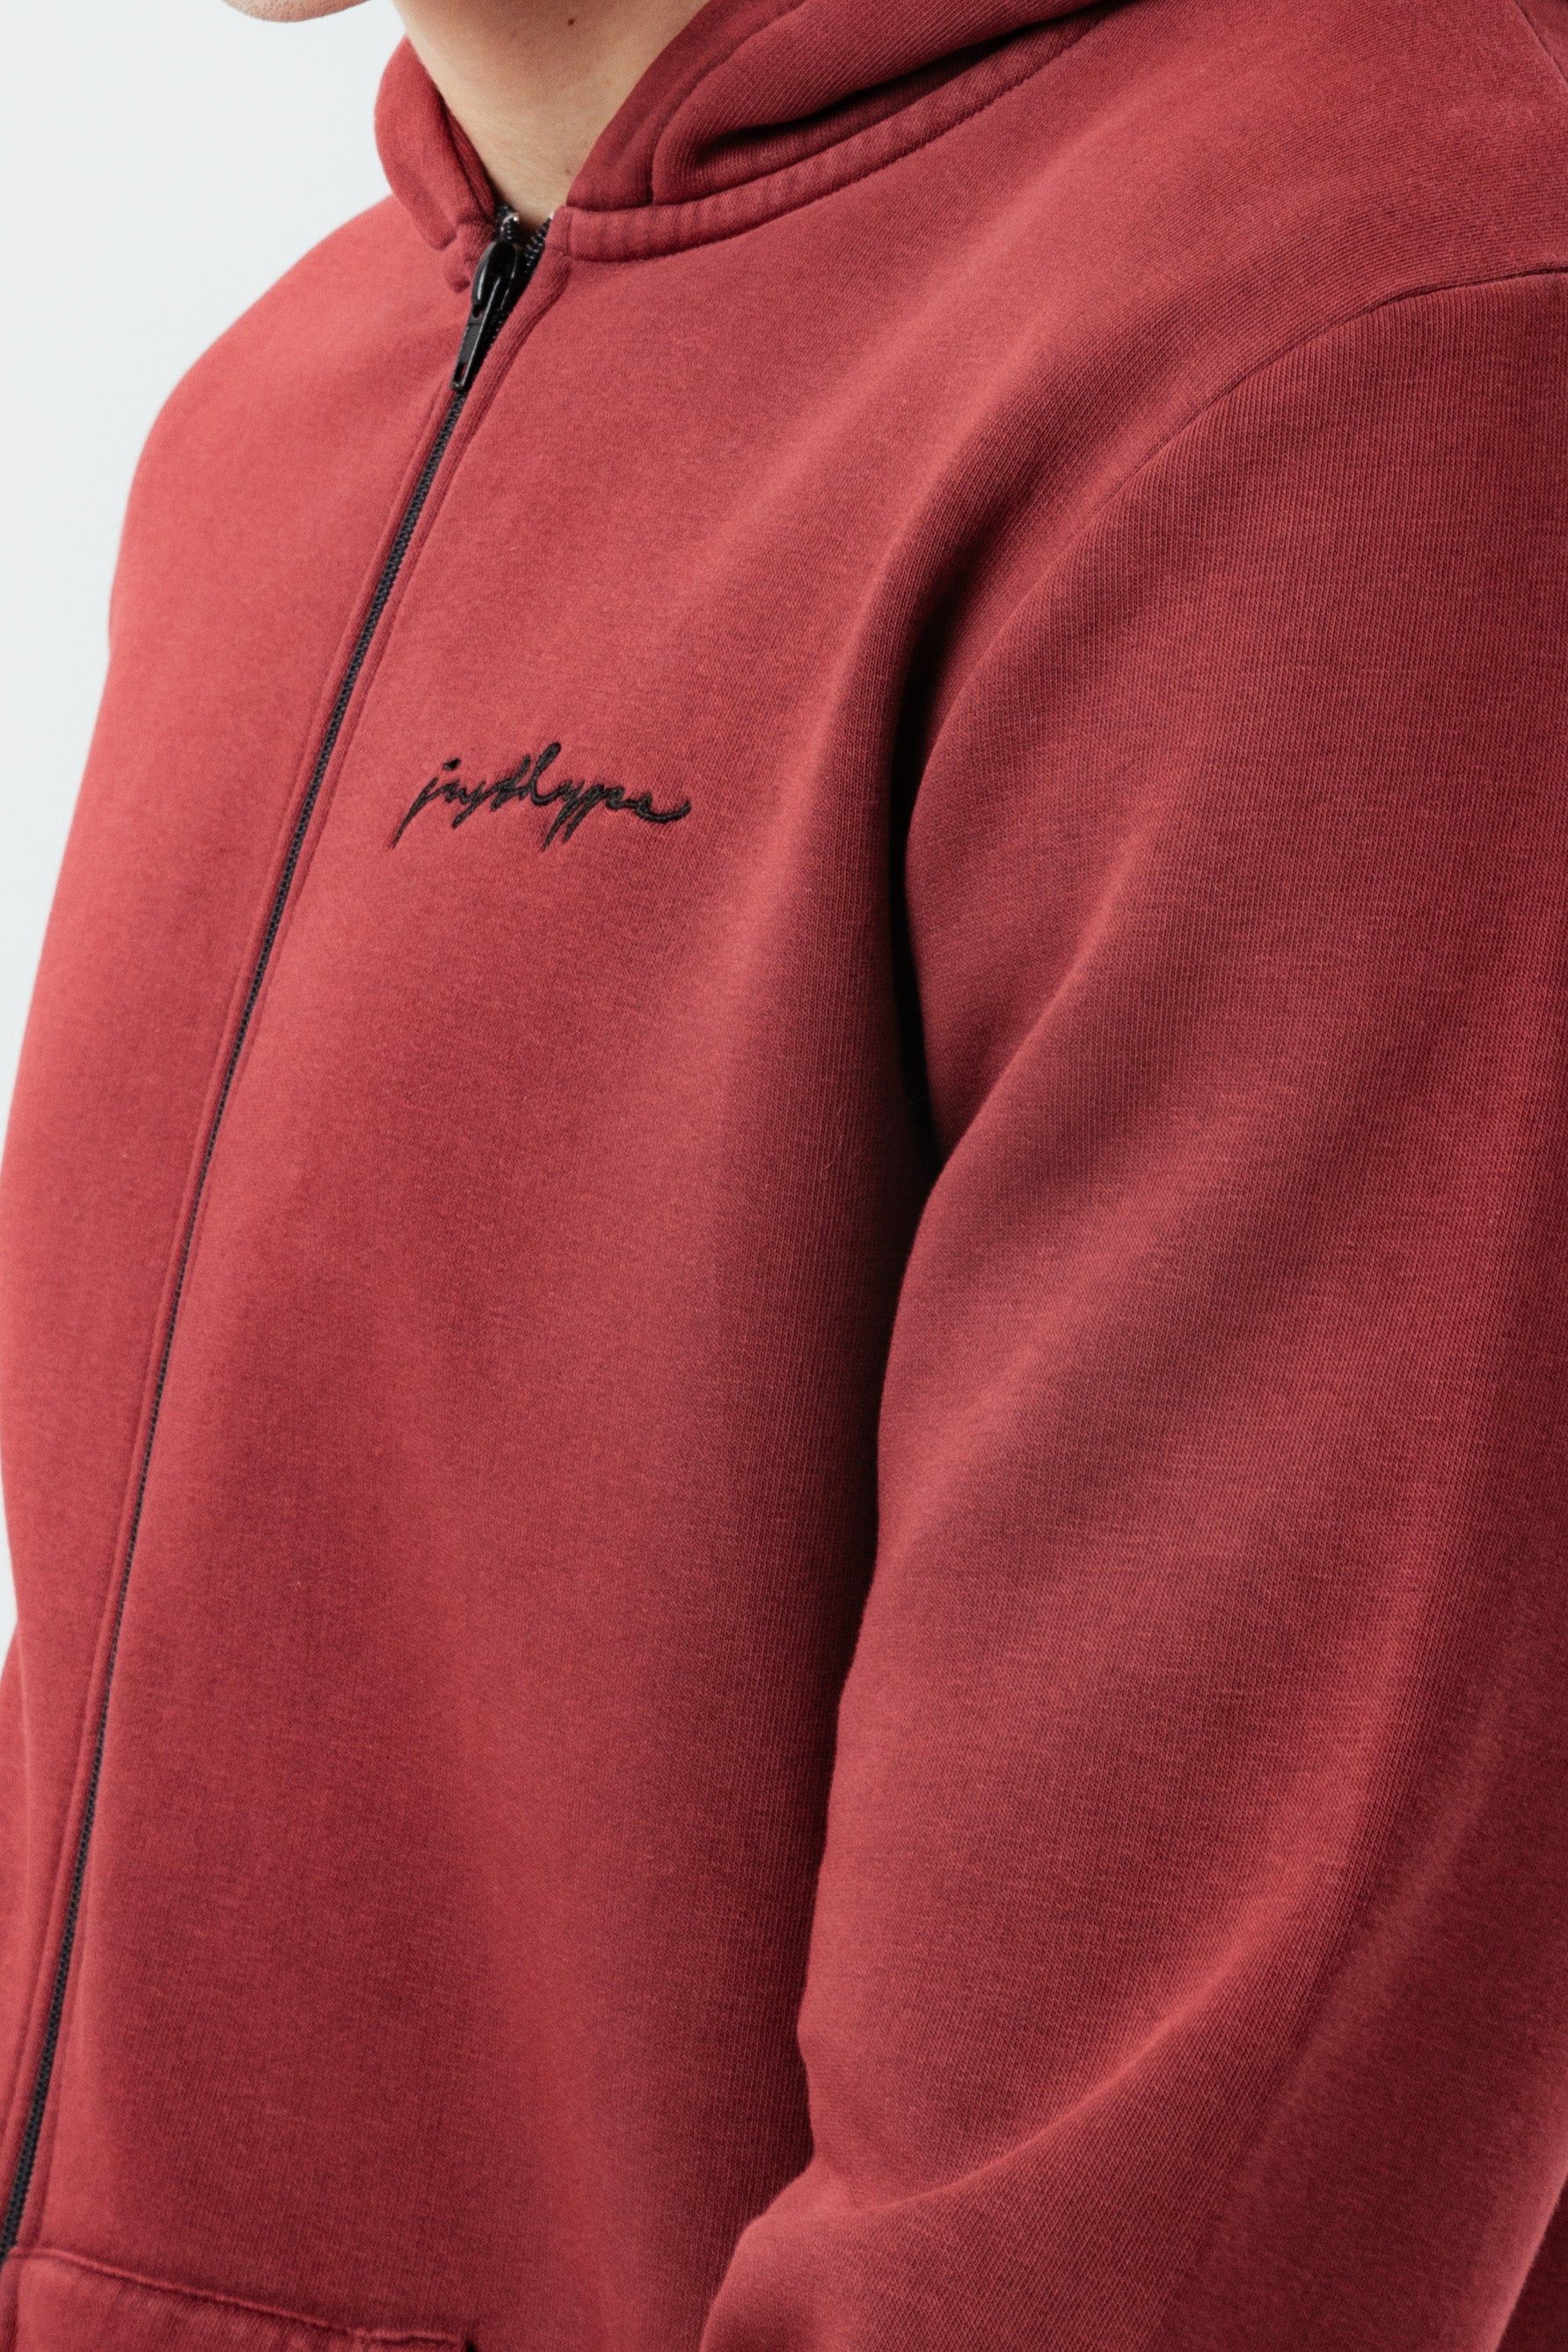 The HYPE. Men's Pullover Zip Hoodie boasts a soft touch fabric base for supreme comfort. Designed in our standard men's pullover shape, with a fixed hood, embossed zip puller, double pockets, elasticated hem and ribbed cuffs. The model wears a size M. If you like an oversized fit, go up a size, if you like a tight fit go down a size, for a standard fit, select your usual size. Machine wash at 30 degrees.